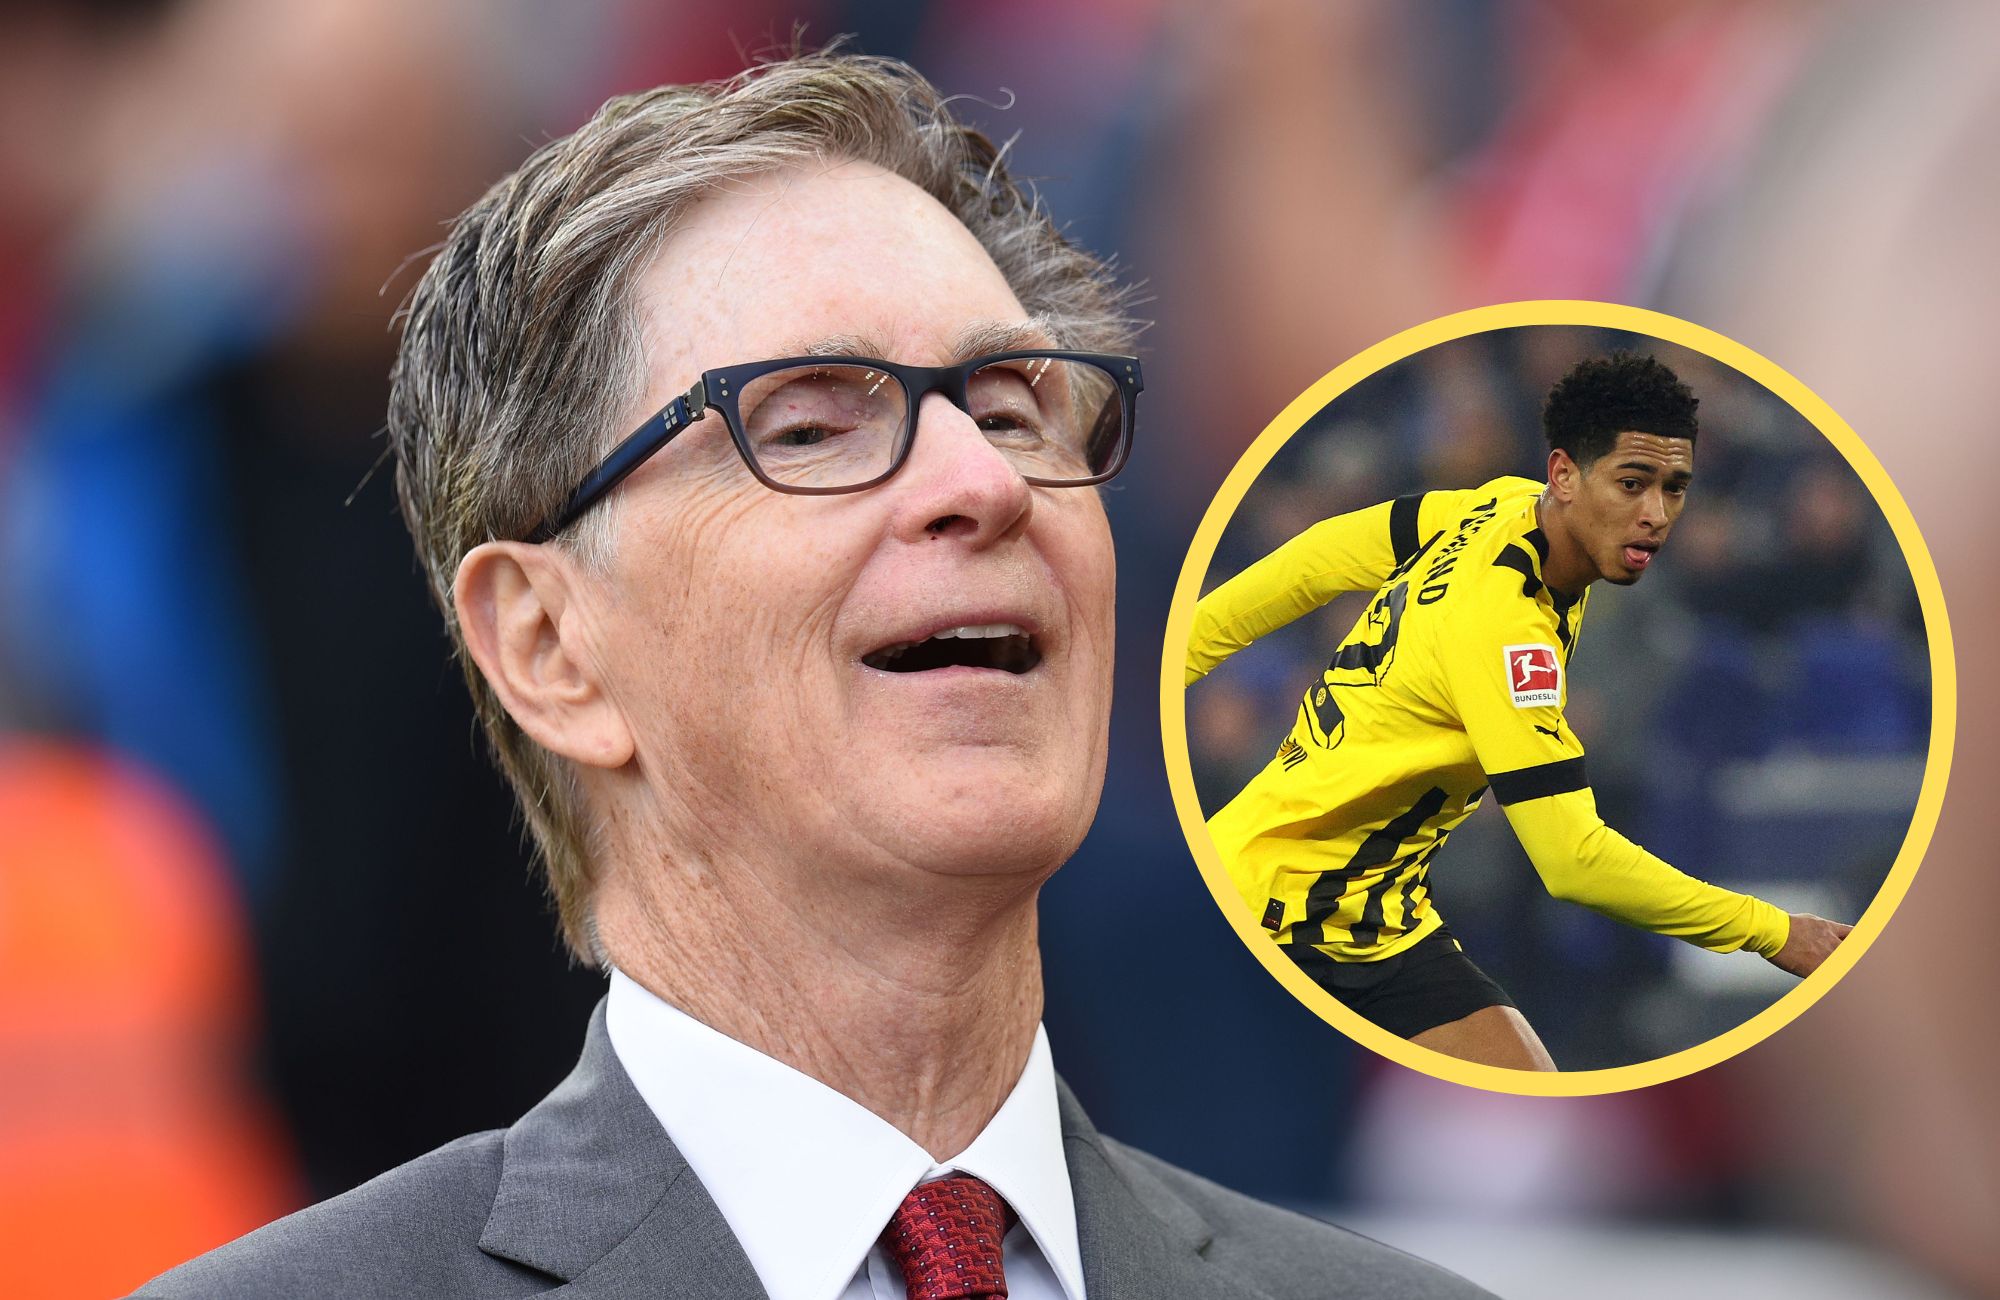 FSG will be due for huge transfer u-turn as news that’s just emerged from Anfield infuriates ex-Red – opinion